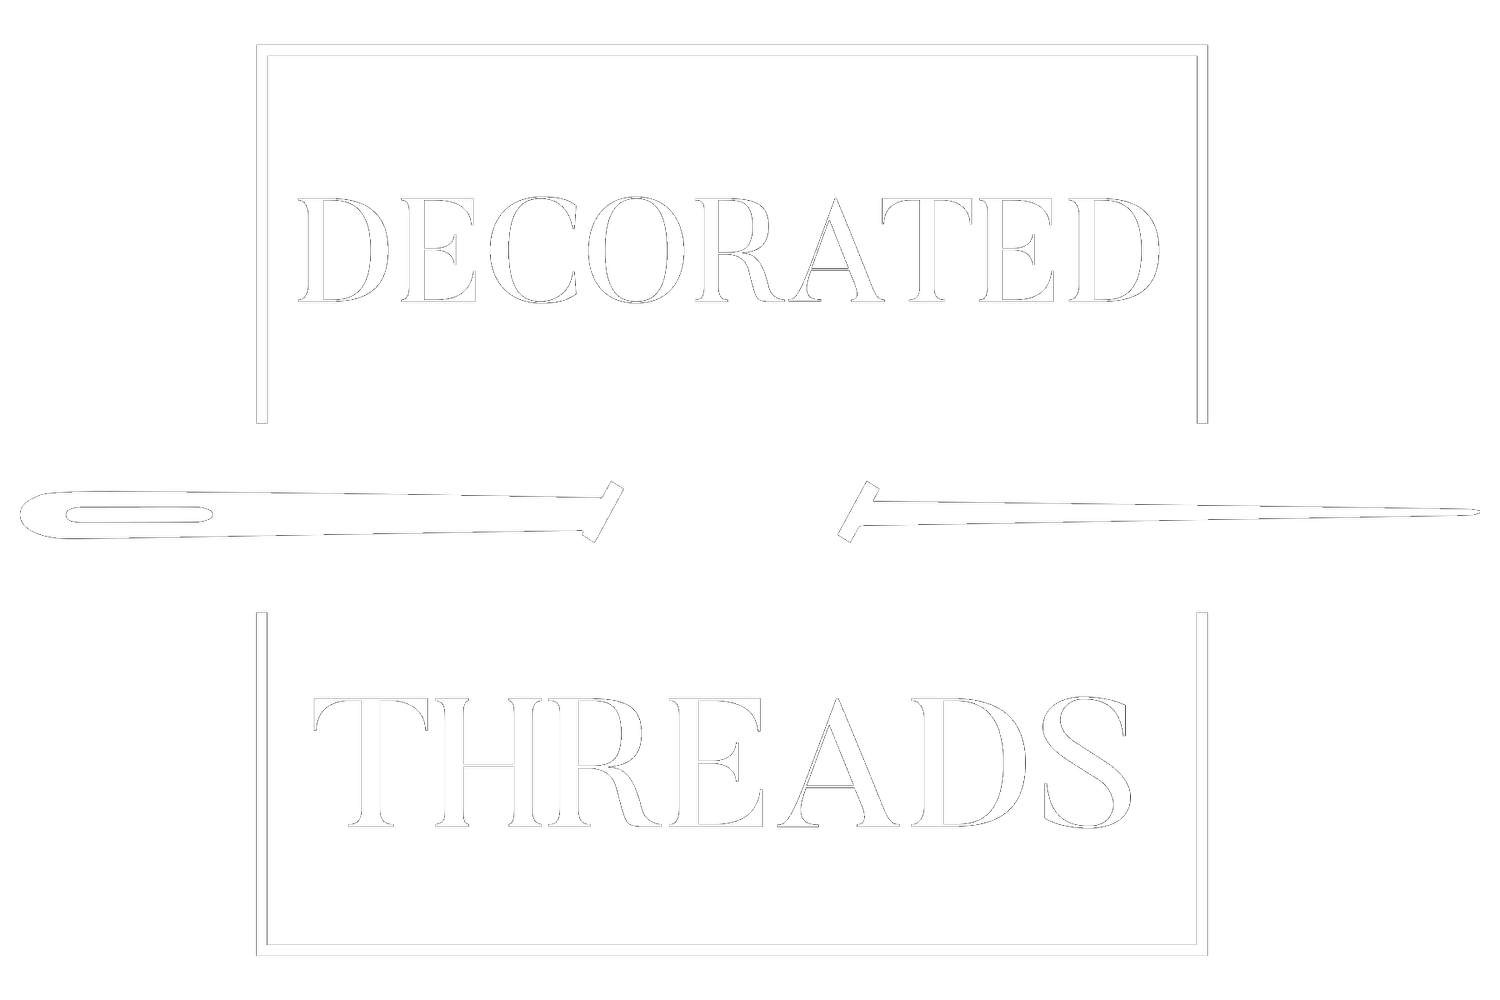 Decorated Threads